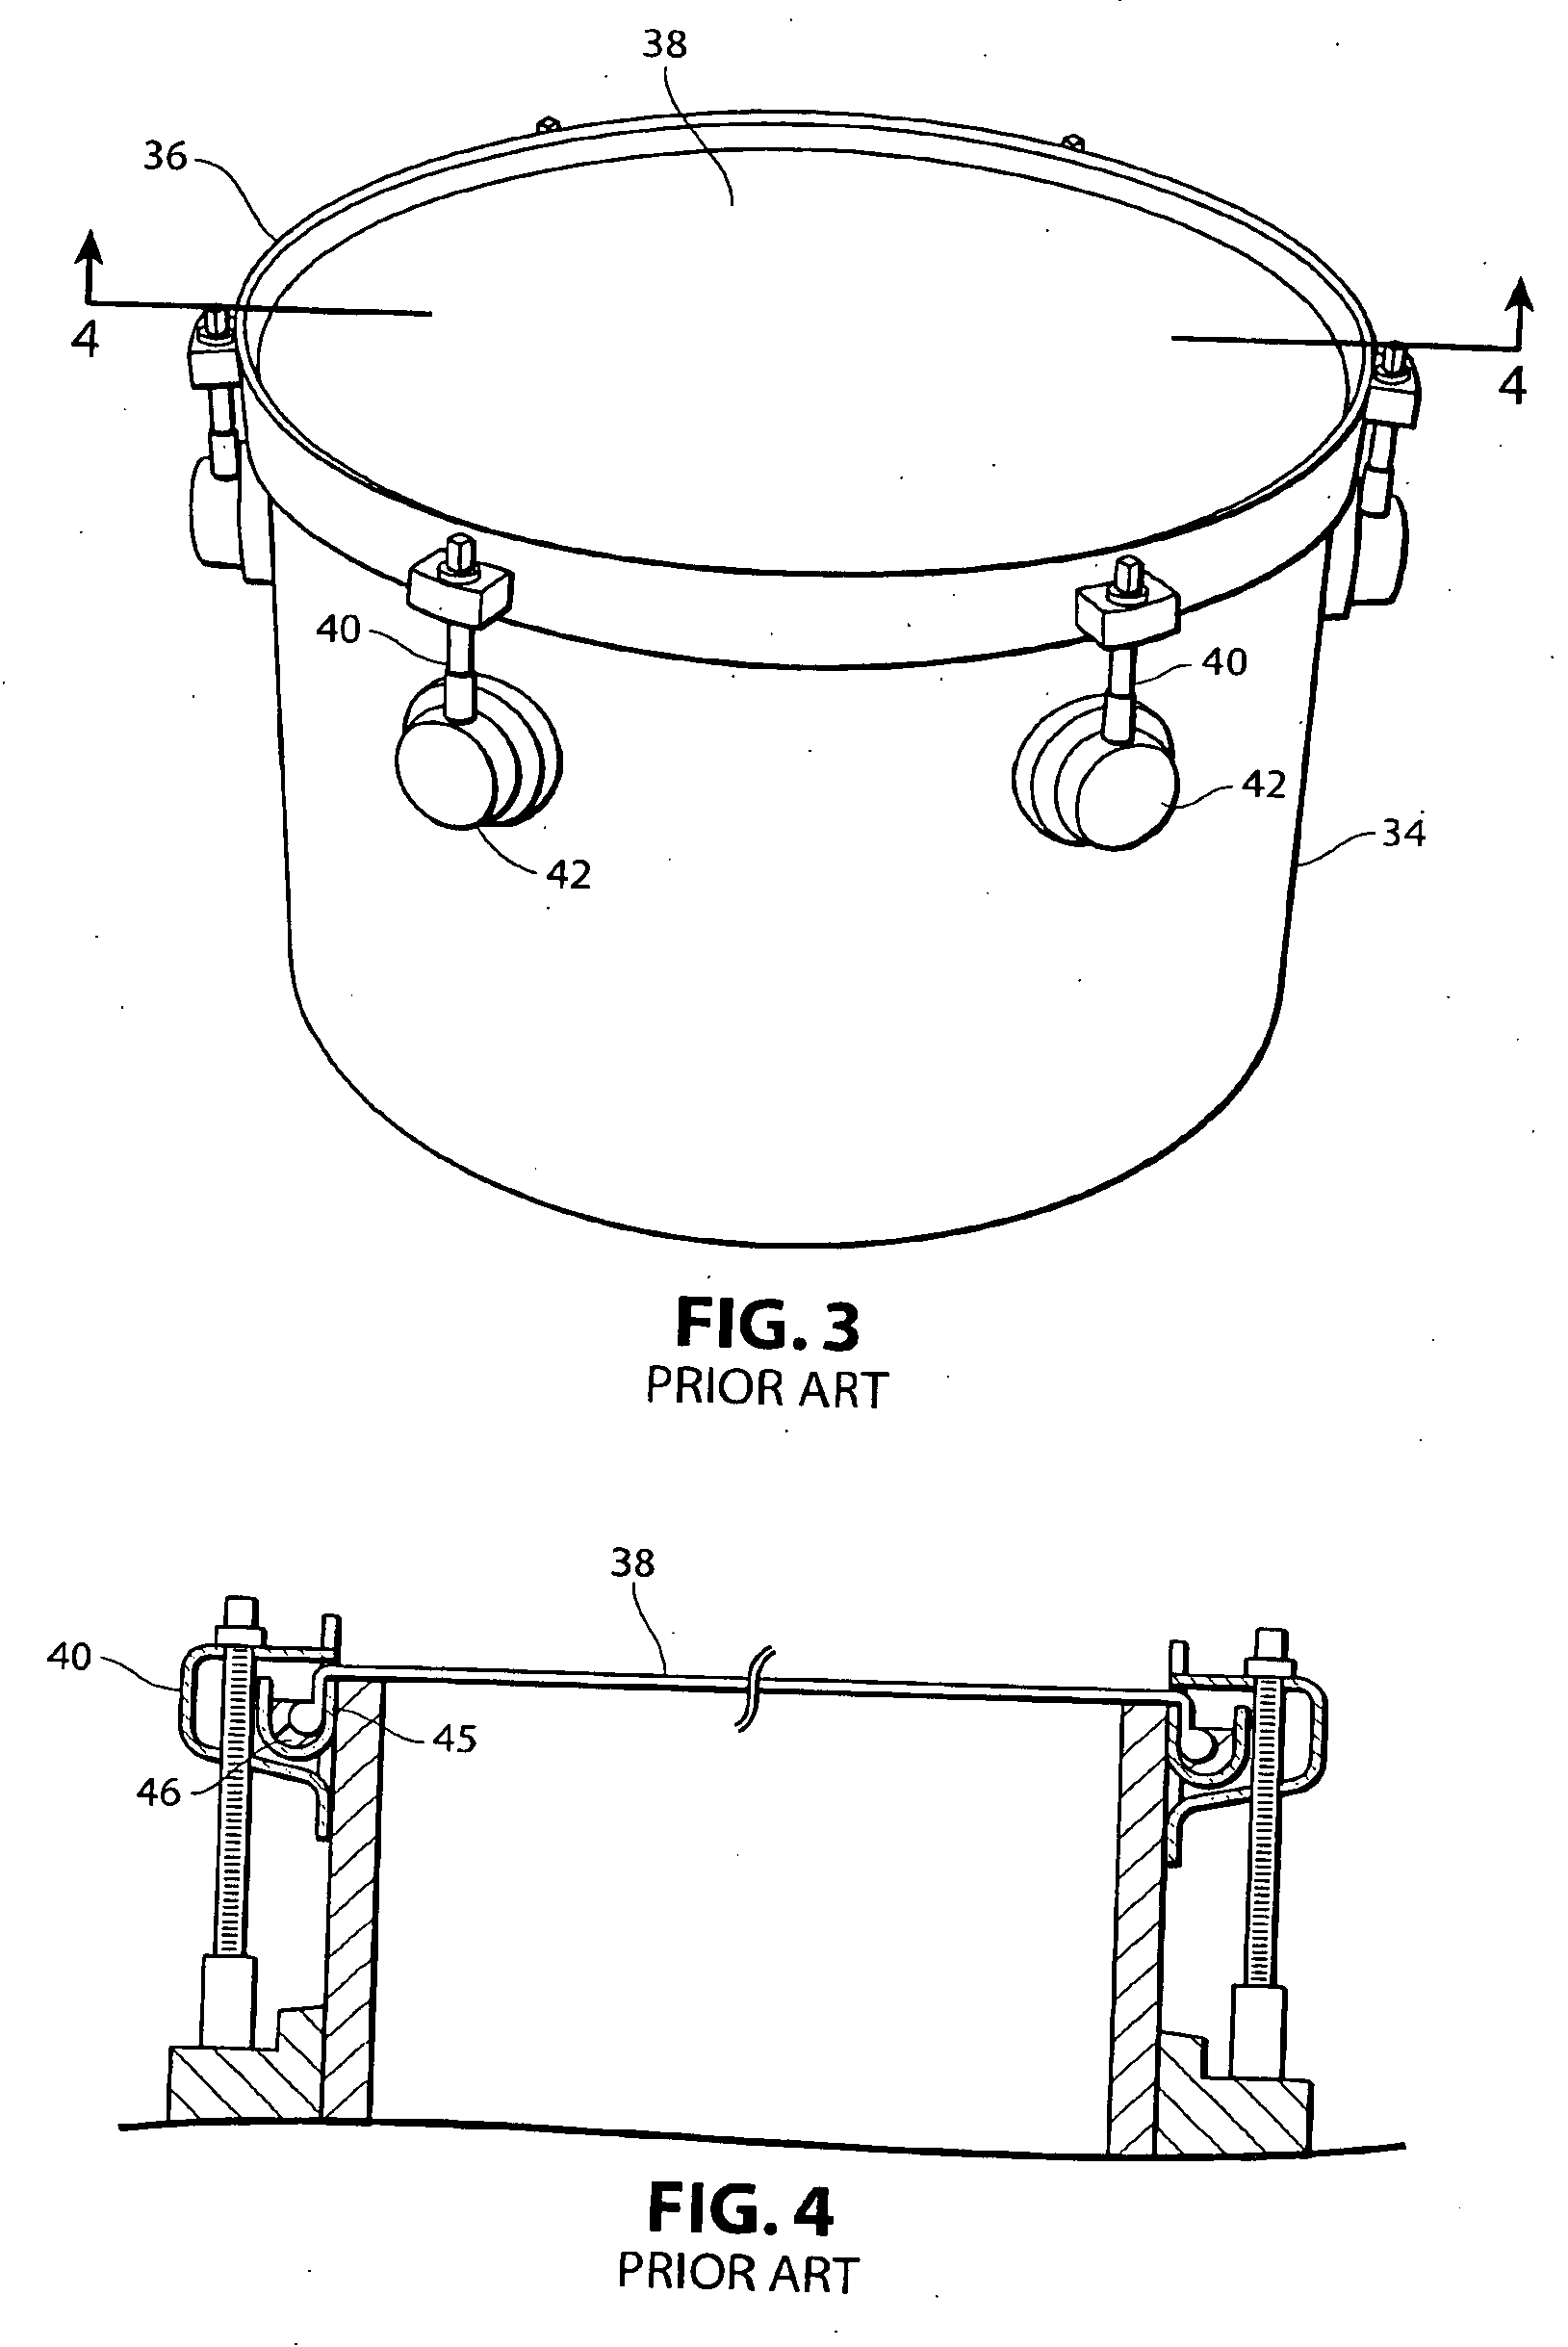 Single adjustment balancing and tuning of acoustic drums